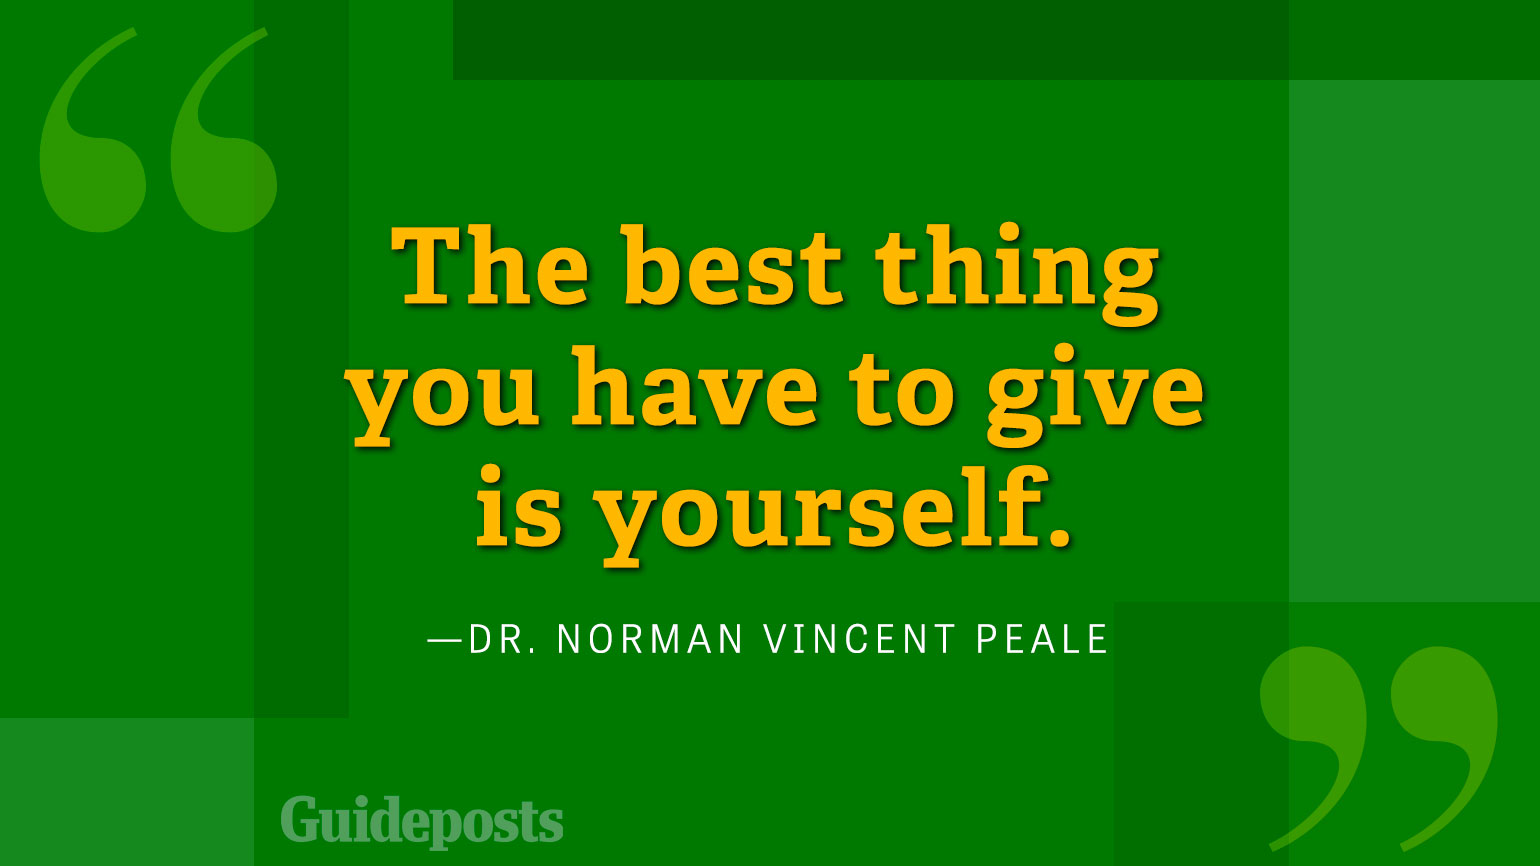 The best thing you have to give is yourself.